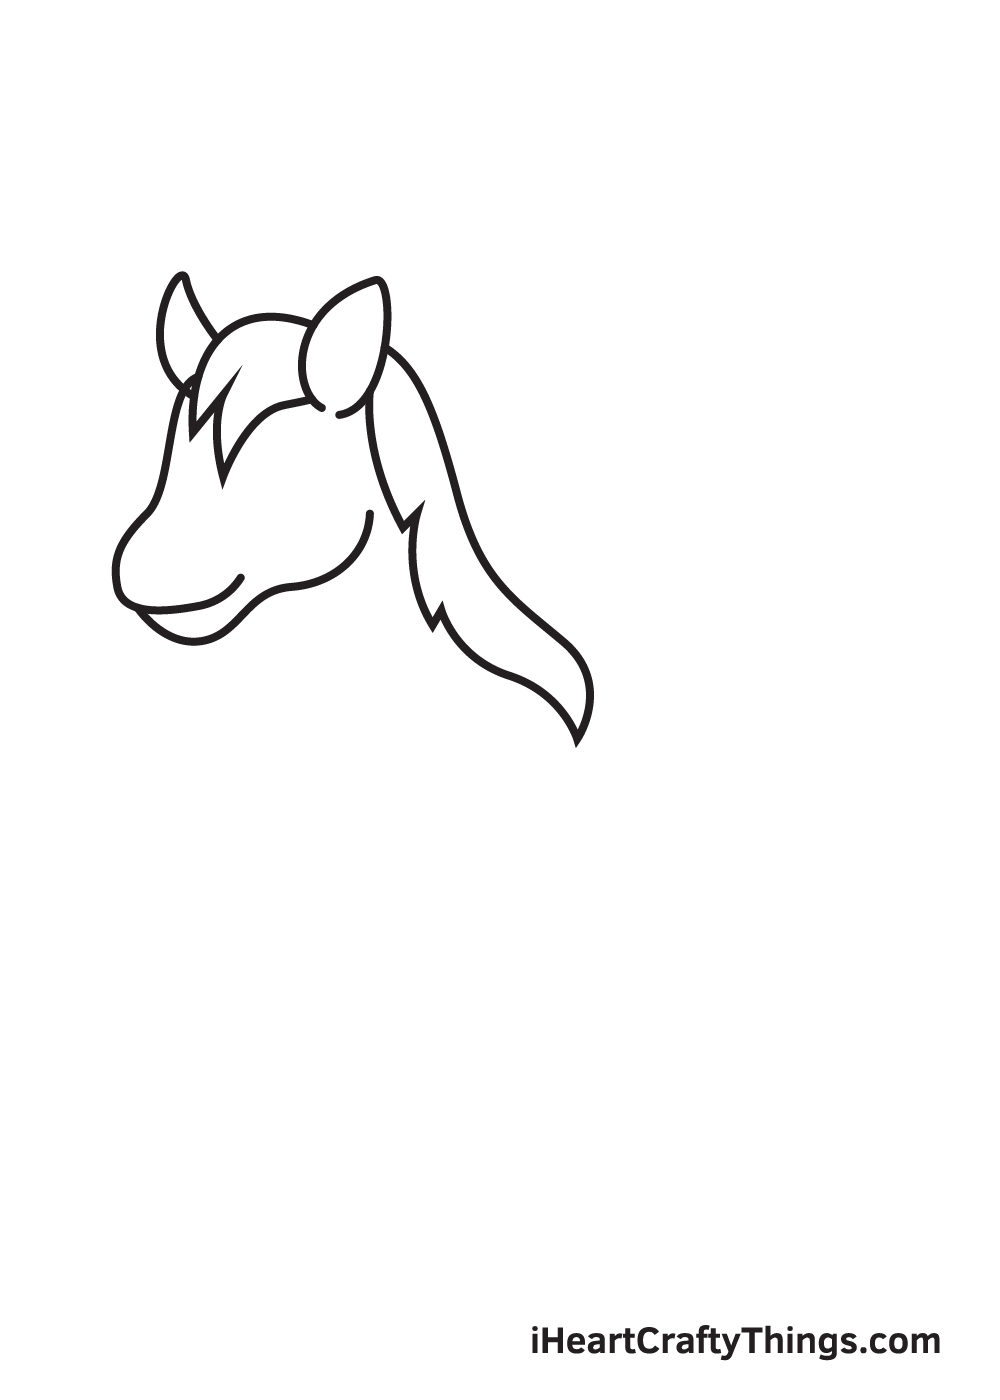 horse drawing - step 3